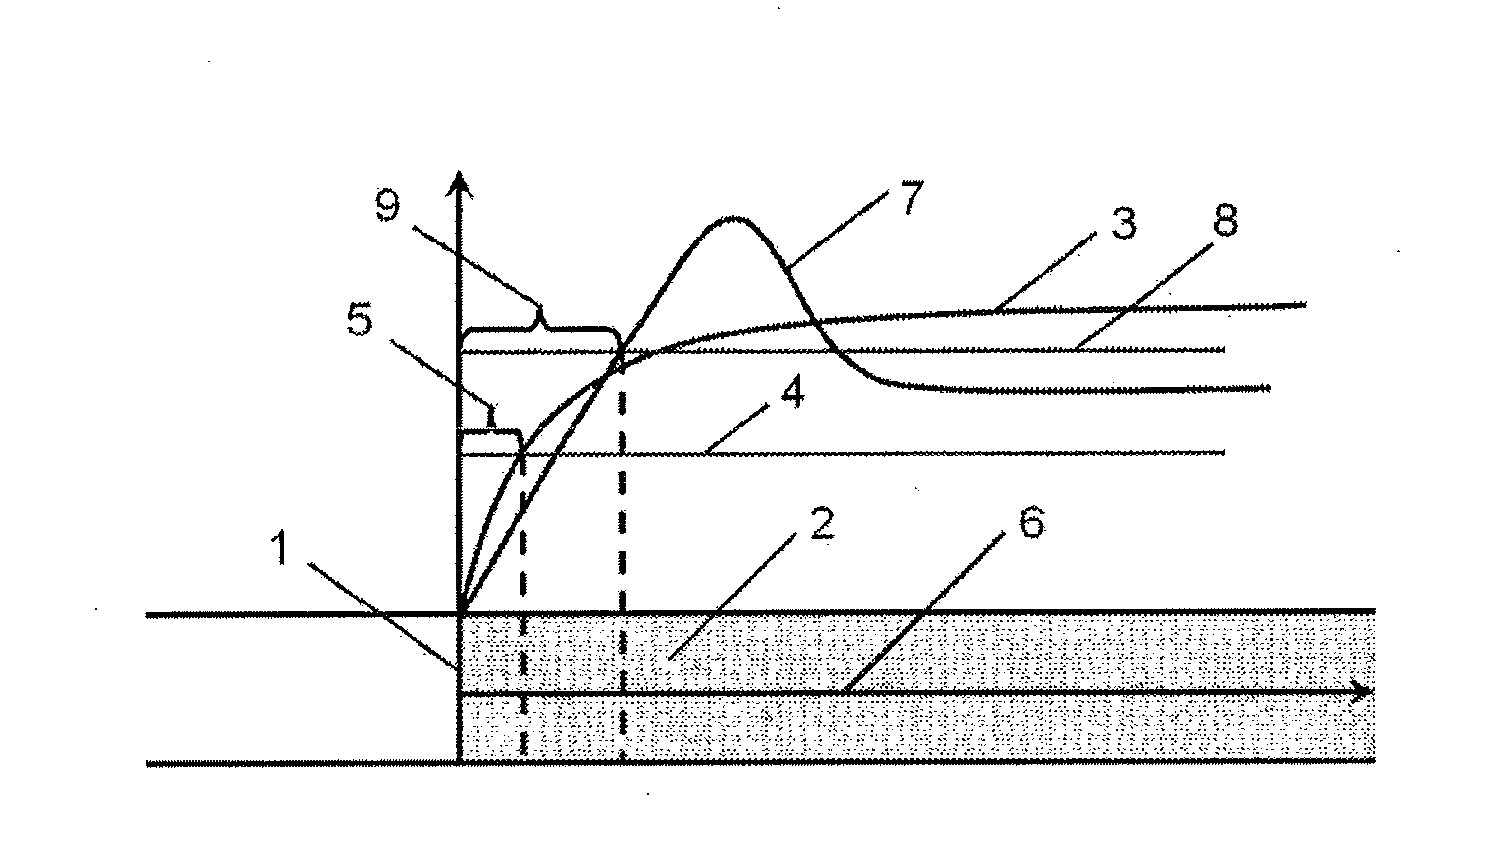 Multi-information coupling prediction method of coal and gas outburst danger